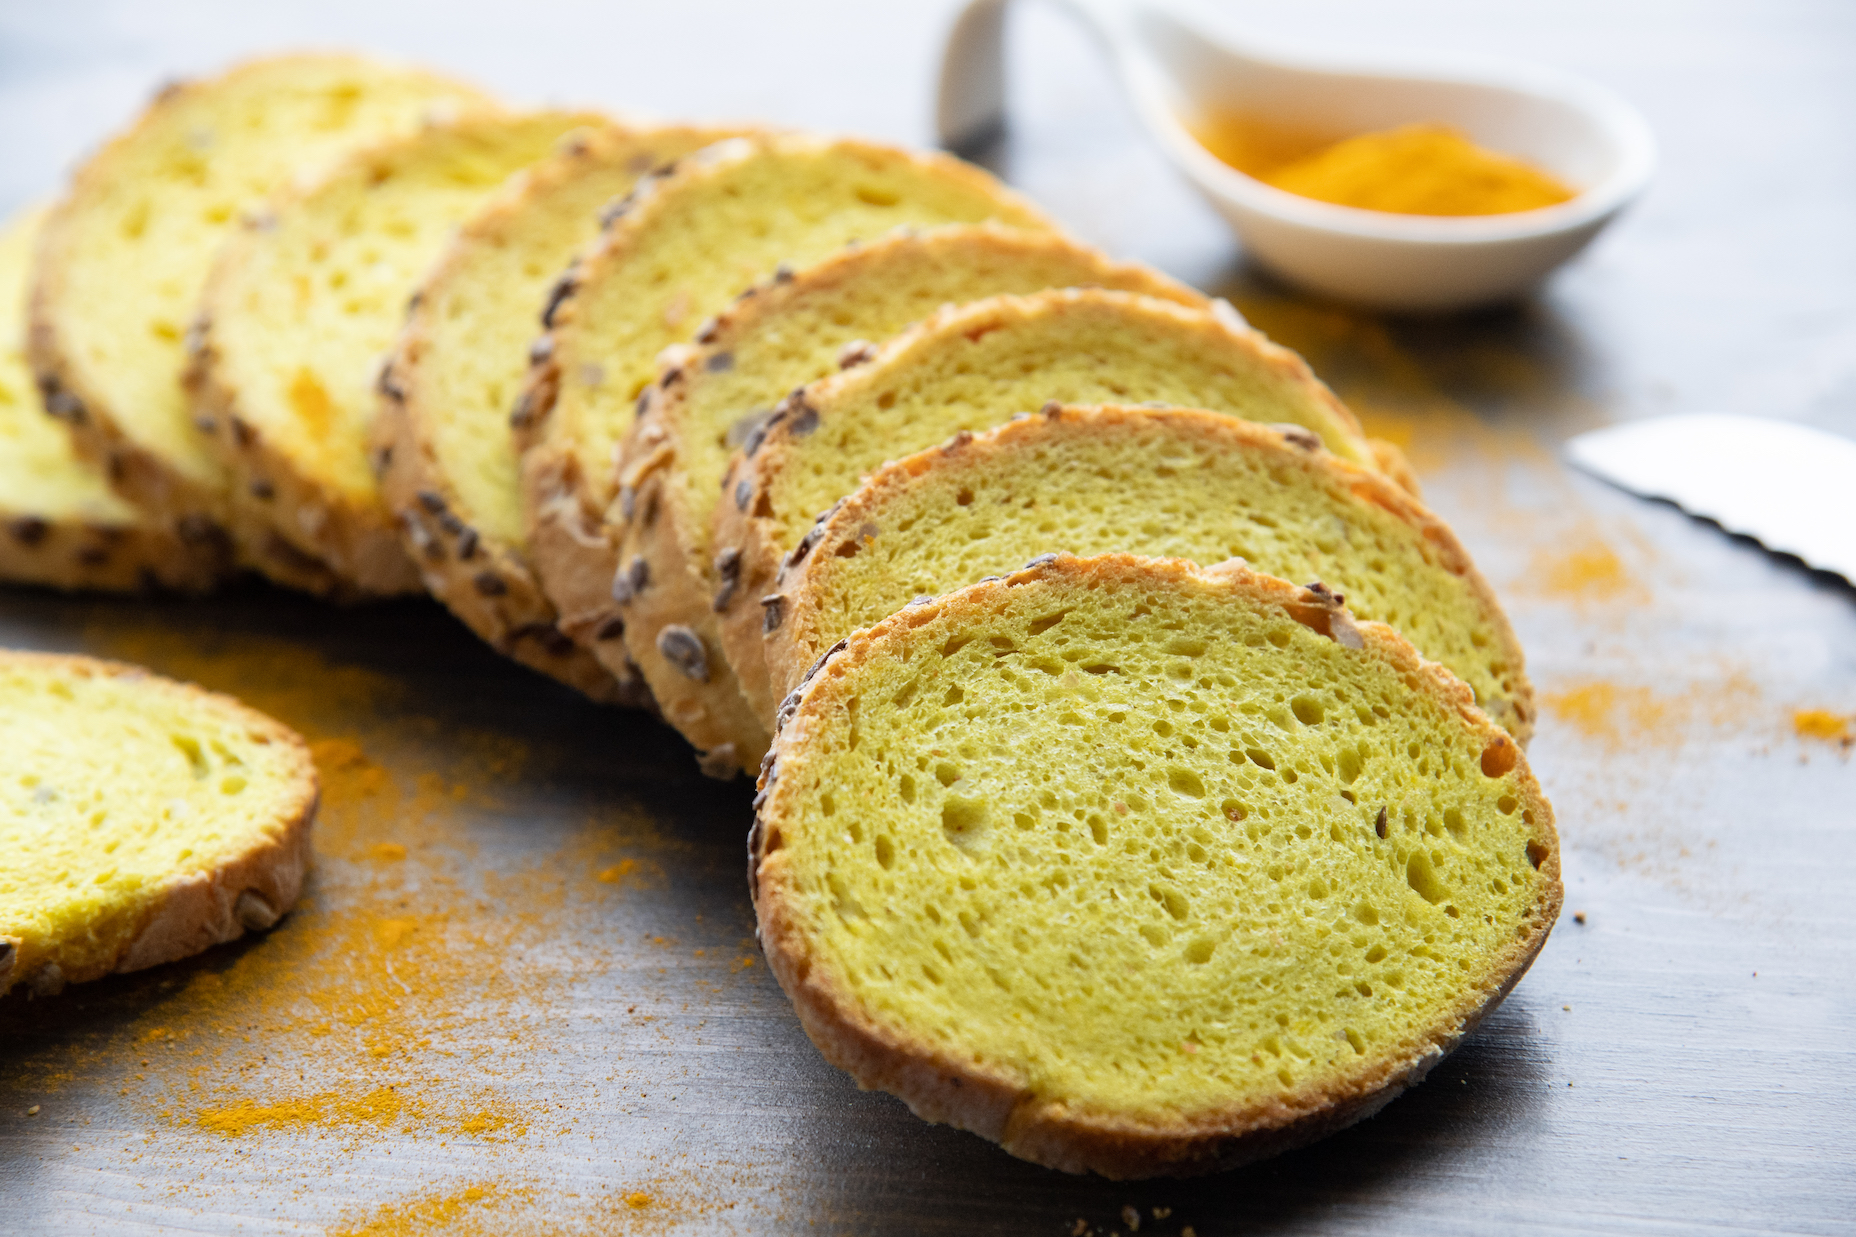 A loaf of turmeric bread with gluten-free bean flour